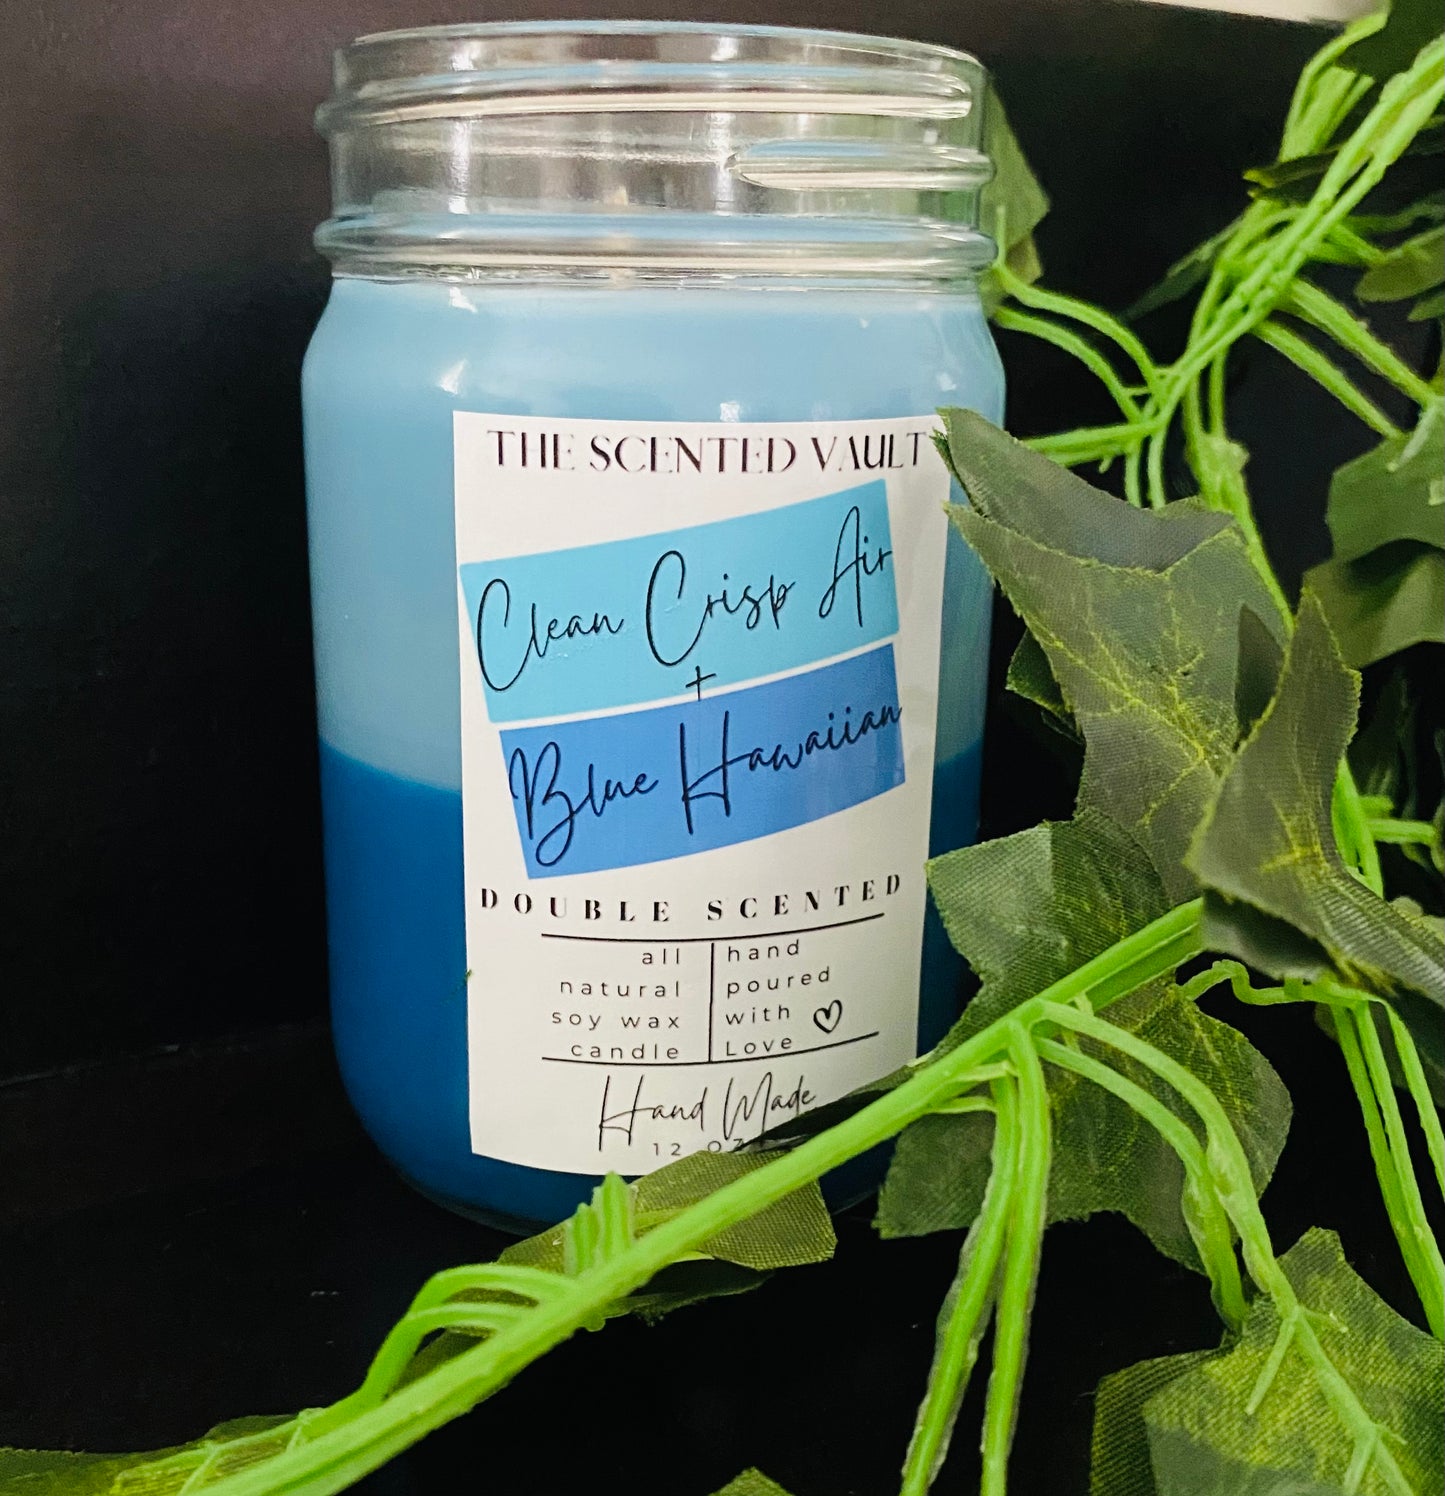 Clean Crisp Air & Blue Hawaiian Double Scented Candle